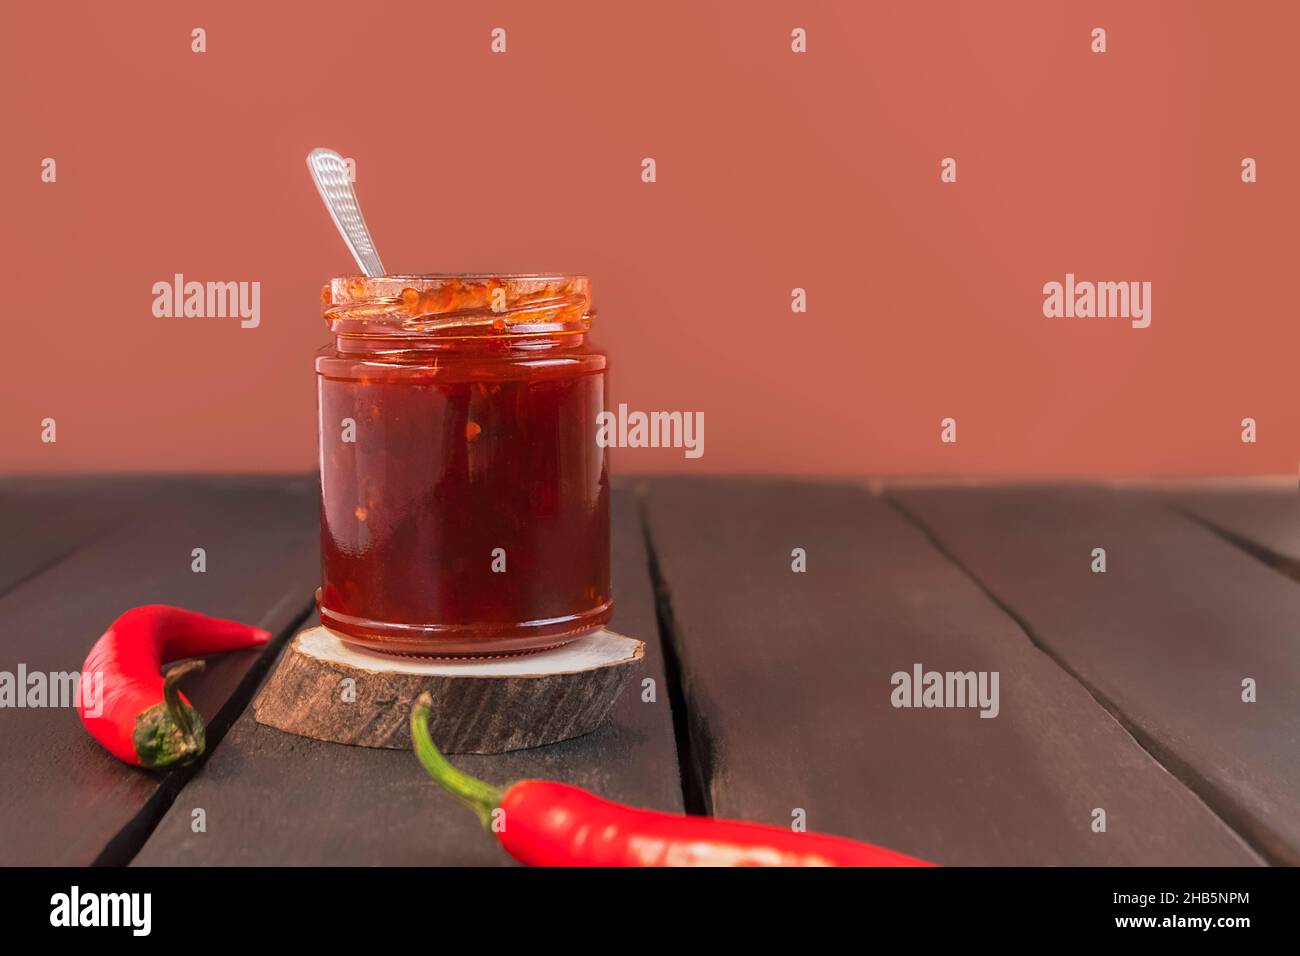 Sweet and spicy red pepper and chili jam in a glass jar on wooden table with copy space Stock Photo